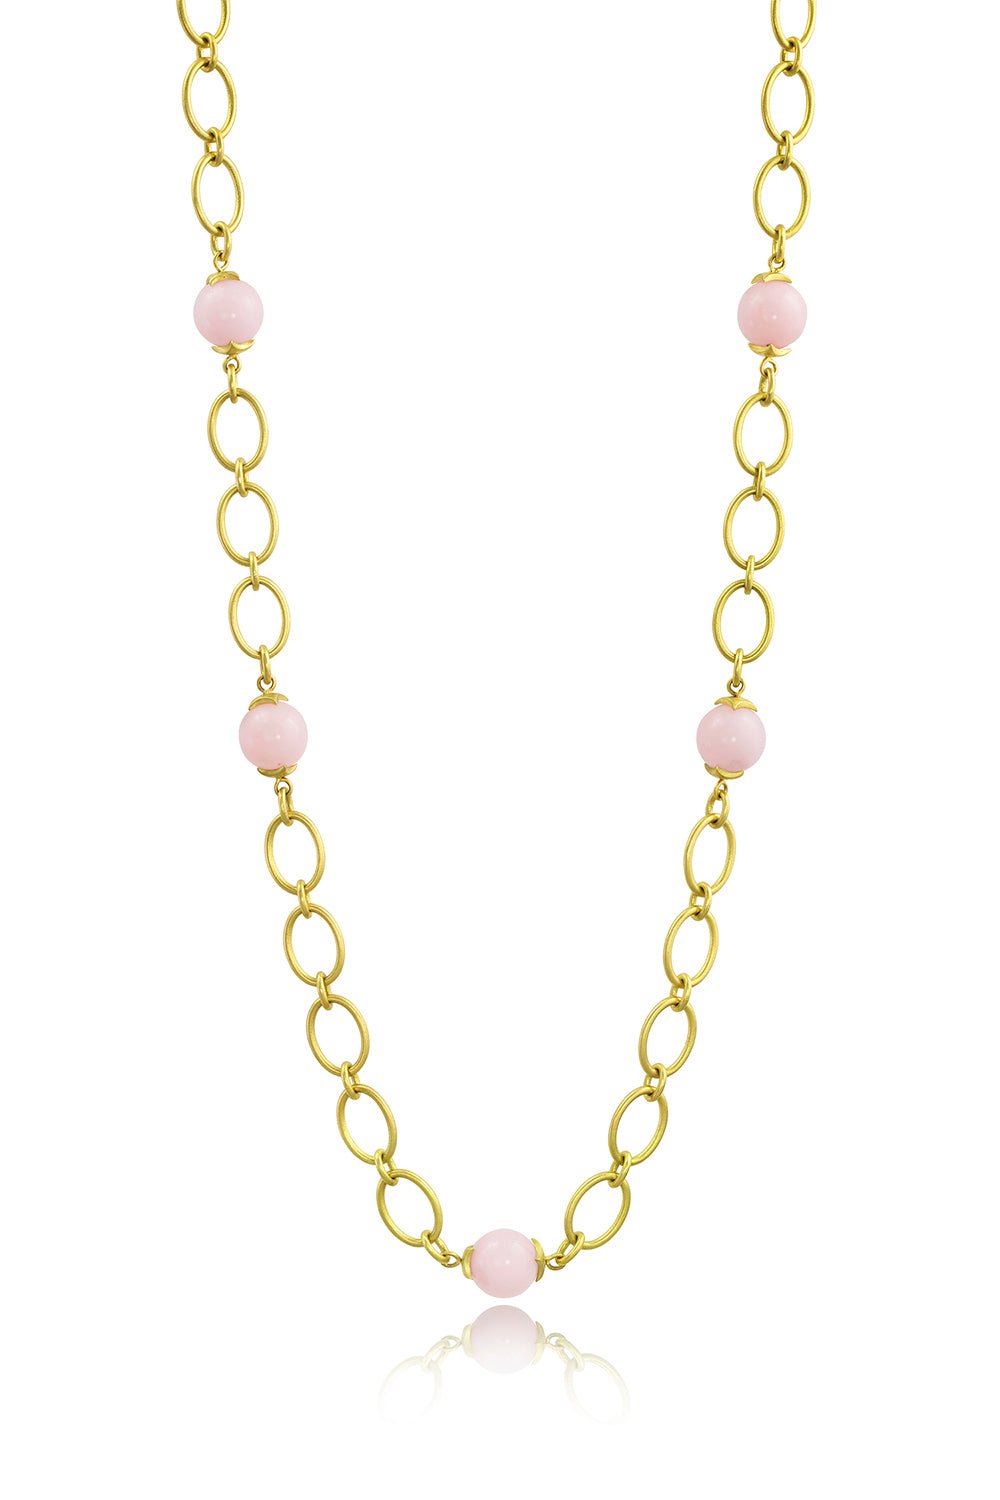 LEIGH MAXWELL-Bahari Link Chain Necklace-YELLOW GOLD